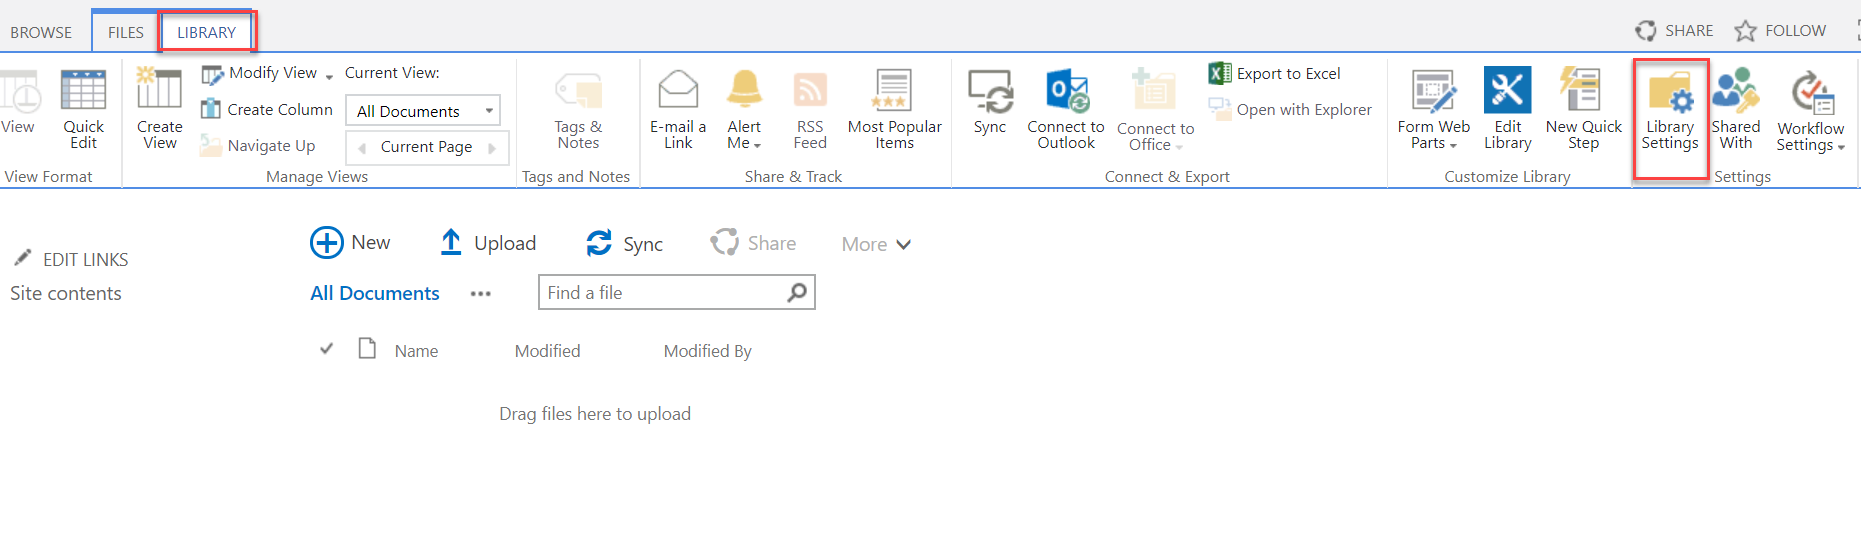 library settings in sharepoint